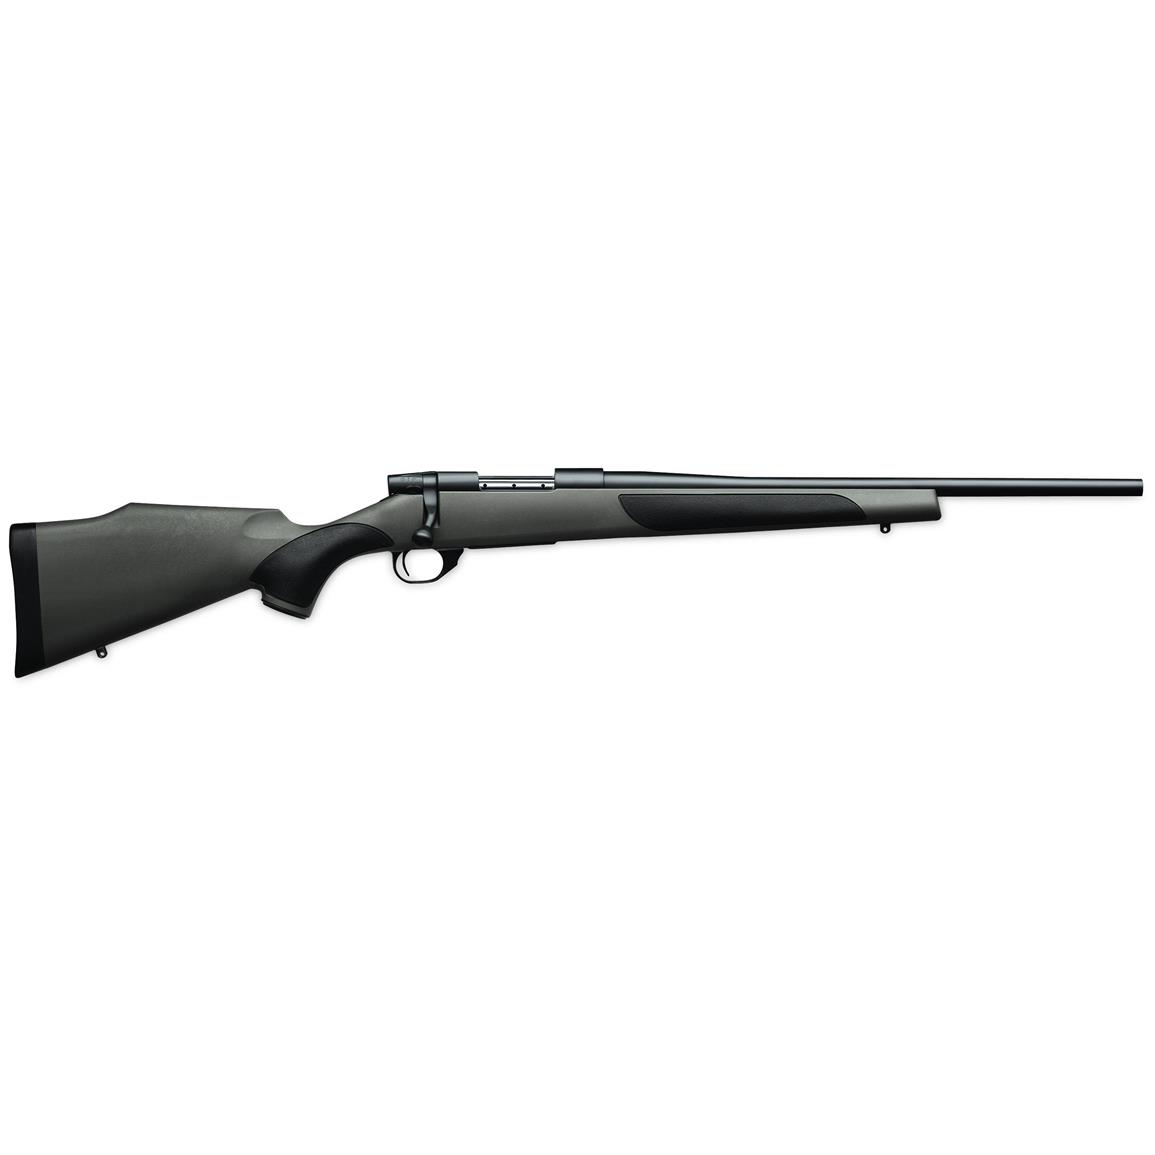 Weatherby Vanguard 2 Carbine, Bolt Action, .308 Winchester, 20" Barrel, 5+1 Rounds